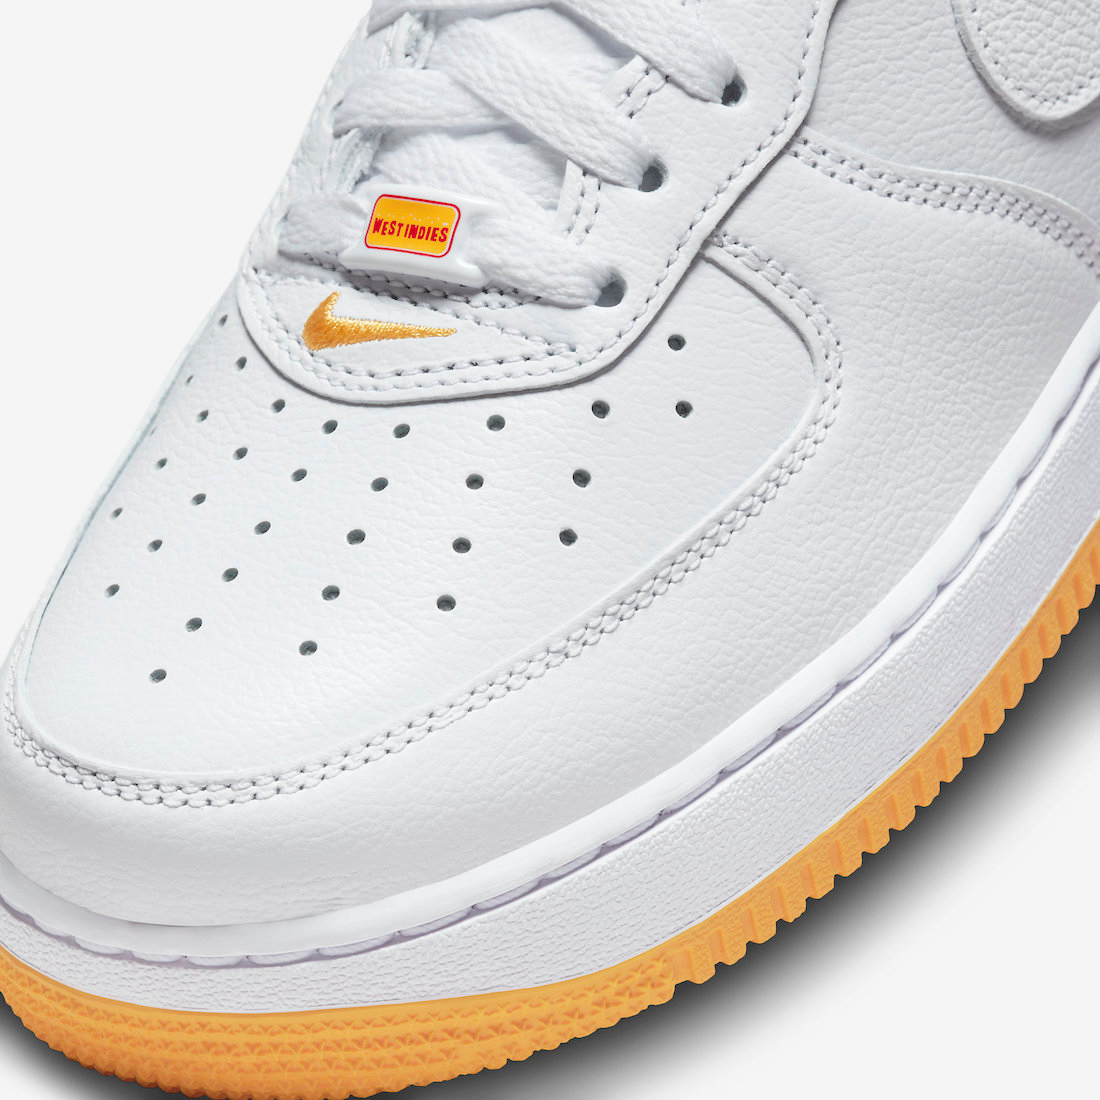 Nike-Air-Force-1-Low-West-Indies-Release-Date-7